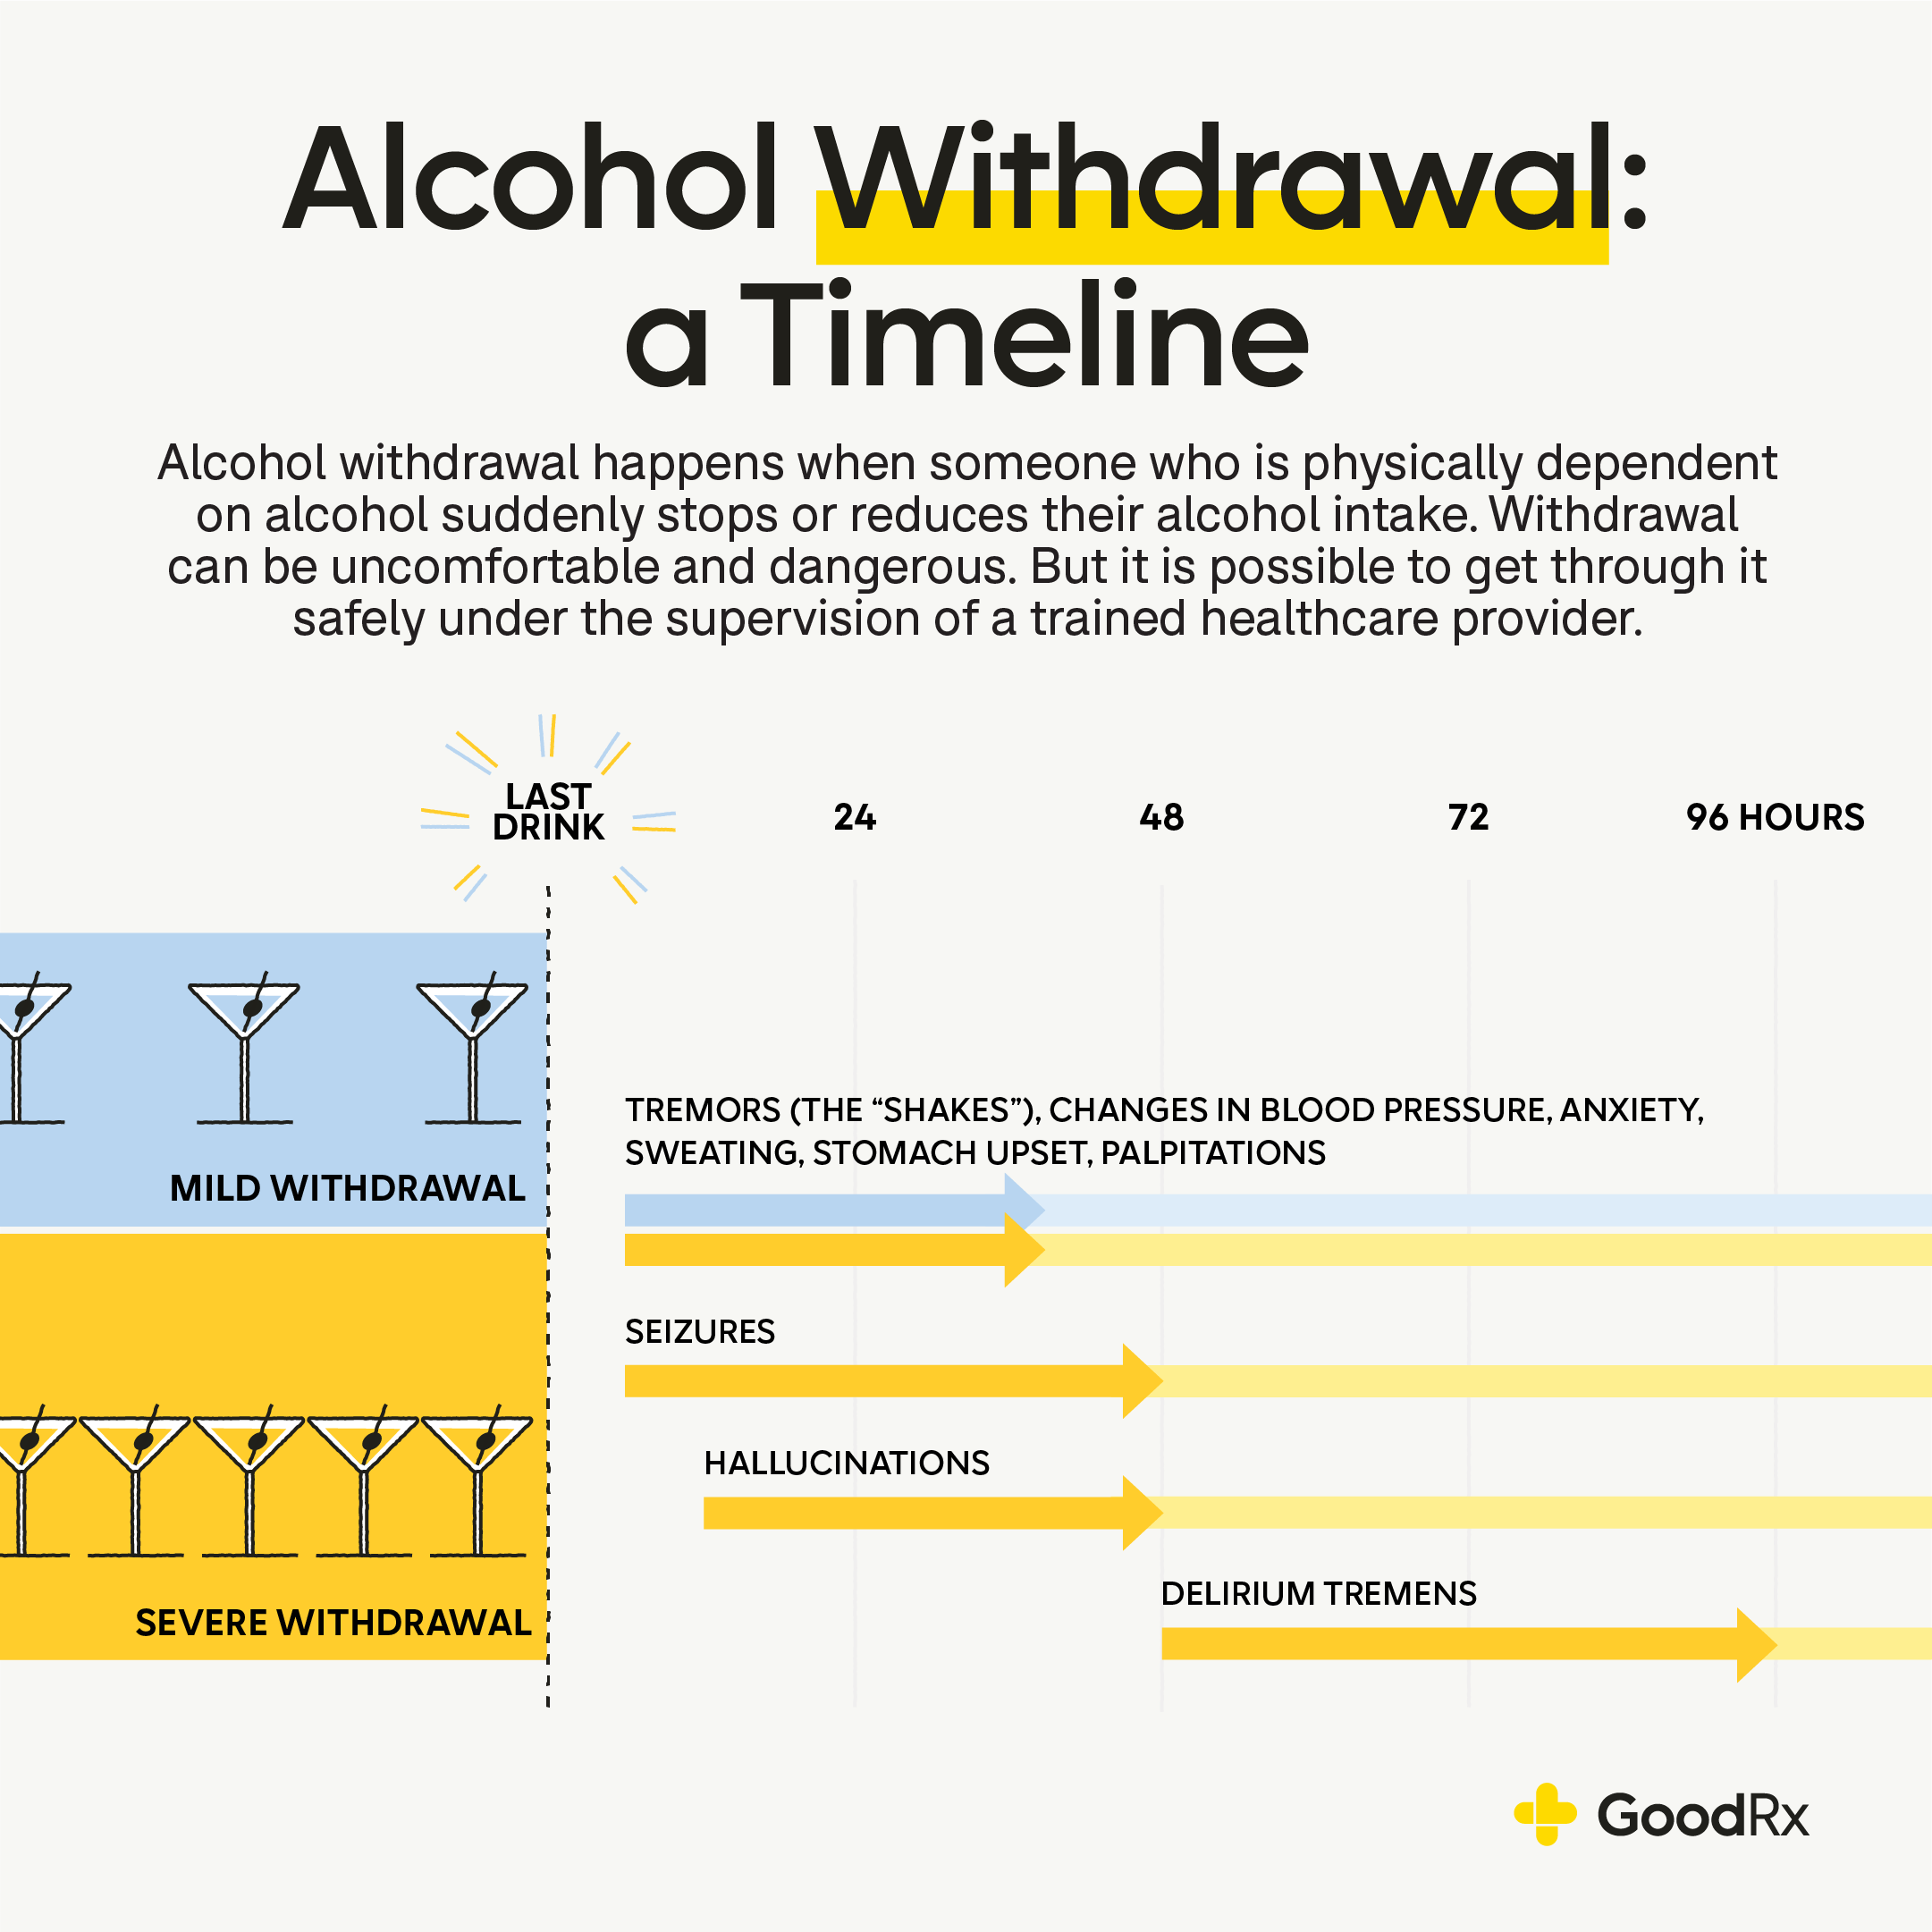 How Long Do Alcohol Withdrawal Shakes Last?